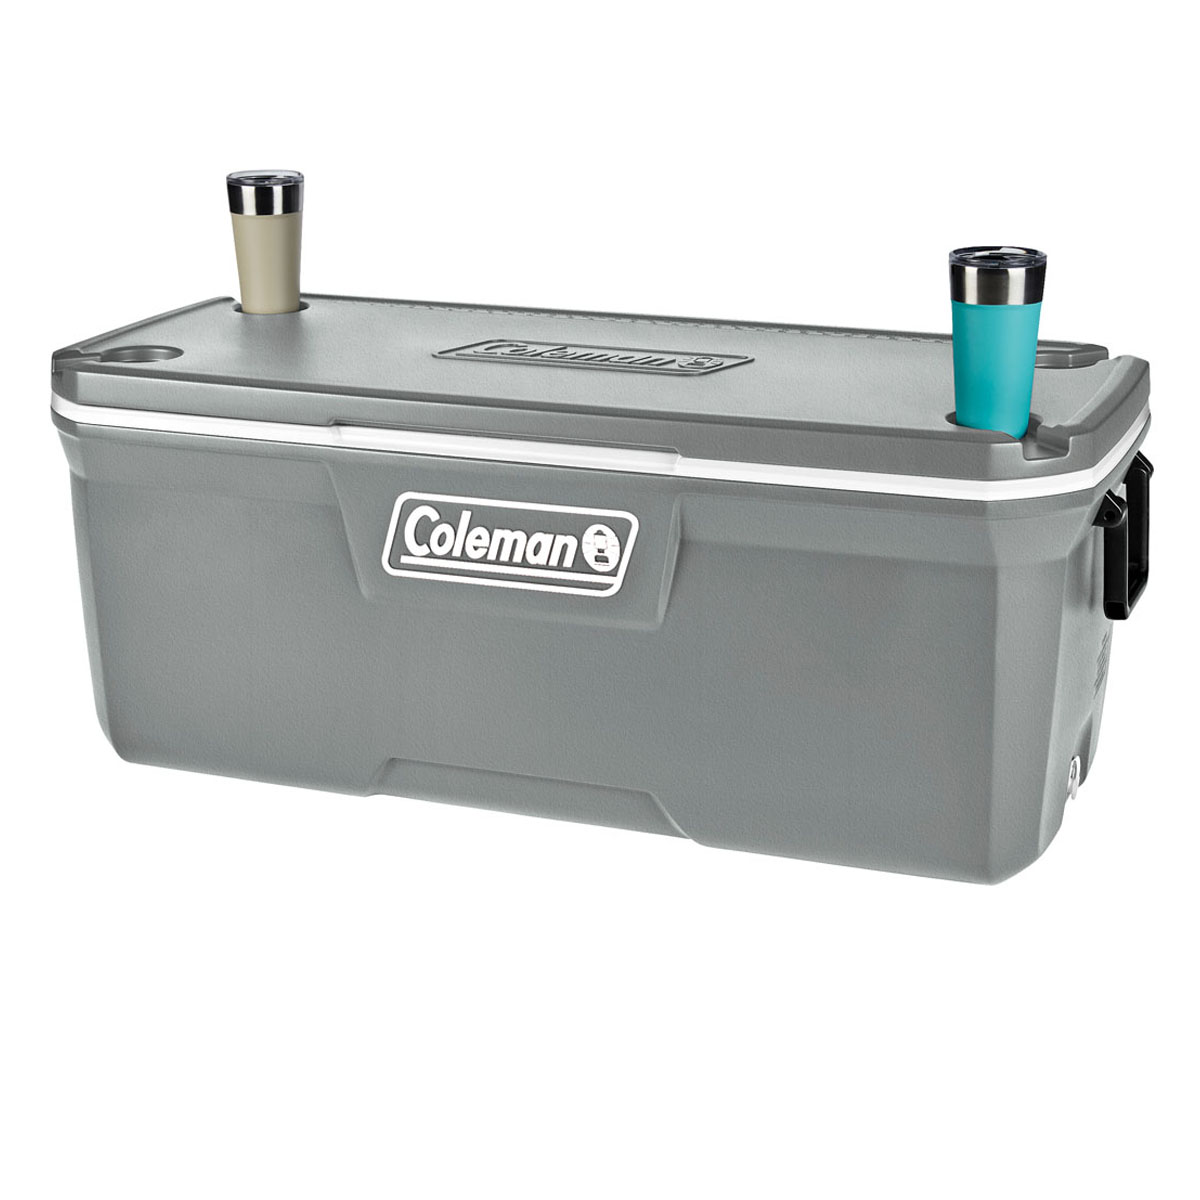 Conservadora Coleman 316 Series 150QT,  image number null